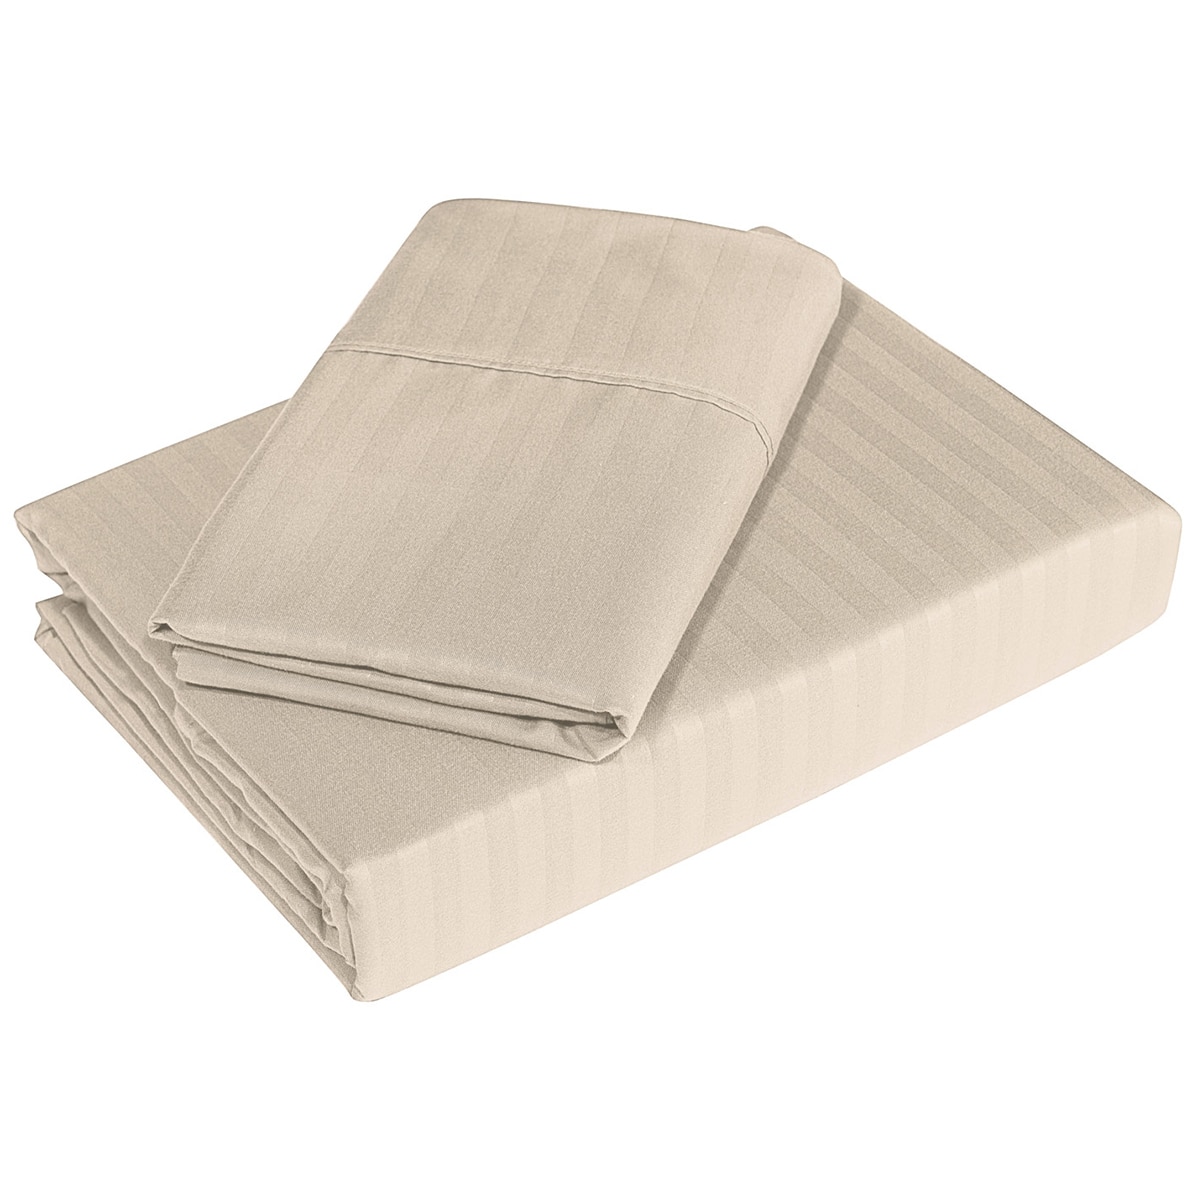 Bdirect Royal Comfort Blended Bamboo Sheet Set with stripes Double - Sand